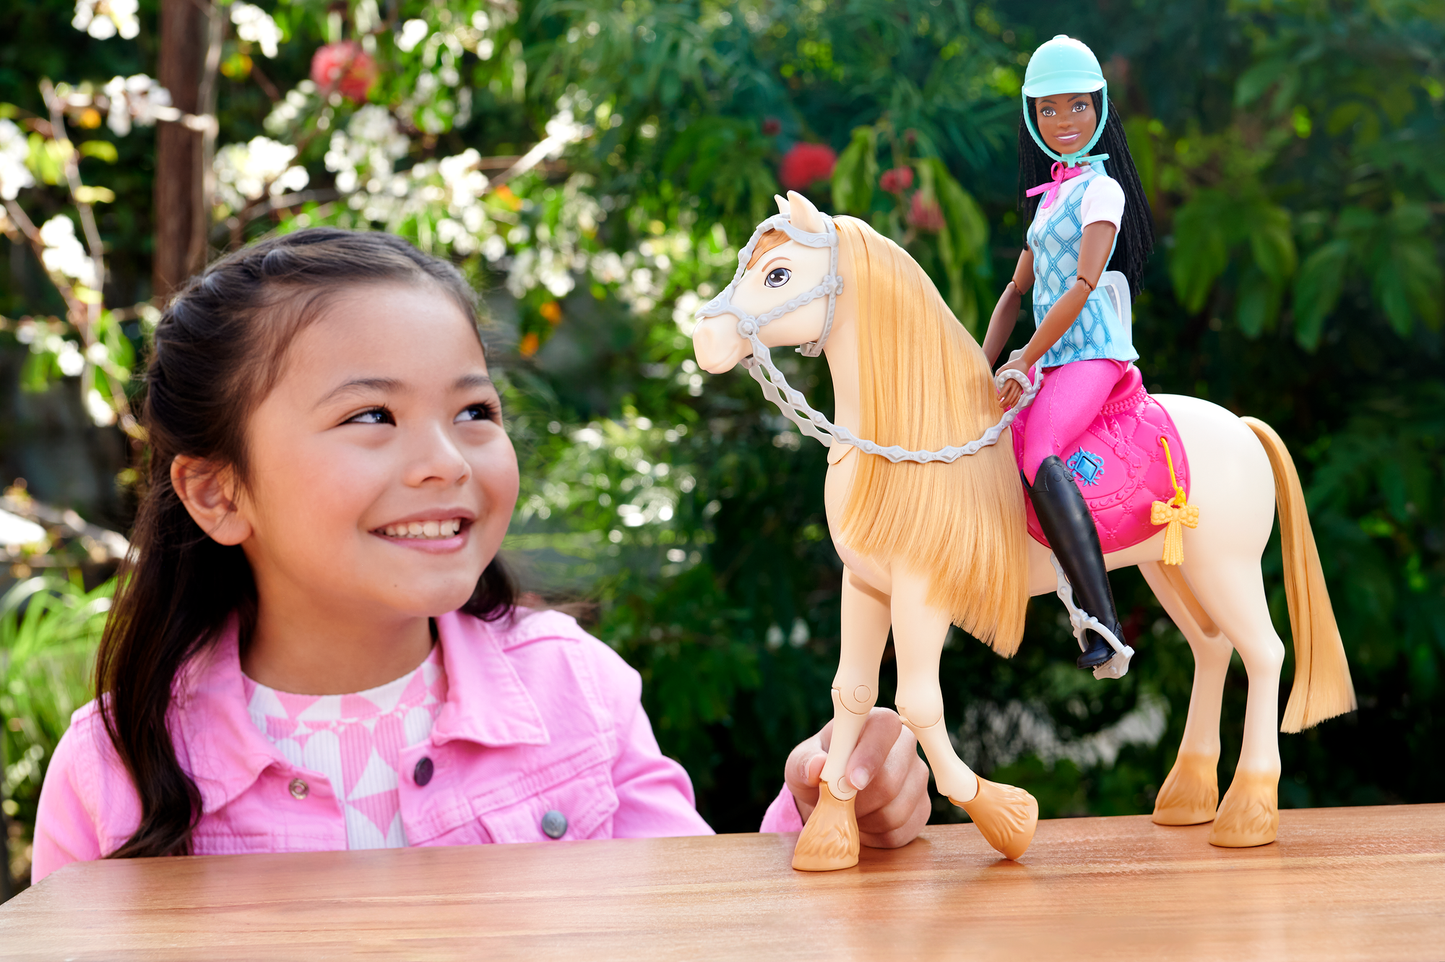 Barbie Mysteries The Great Horse Chase Brooklyn Doll